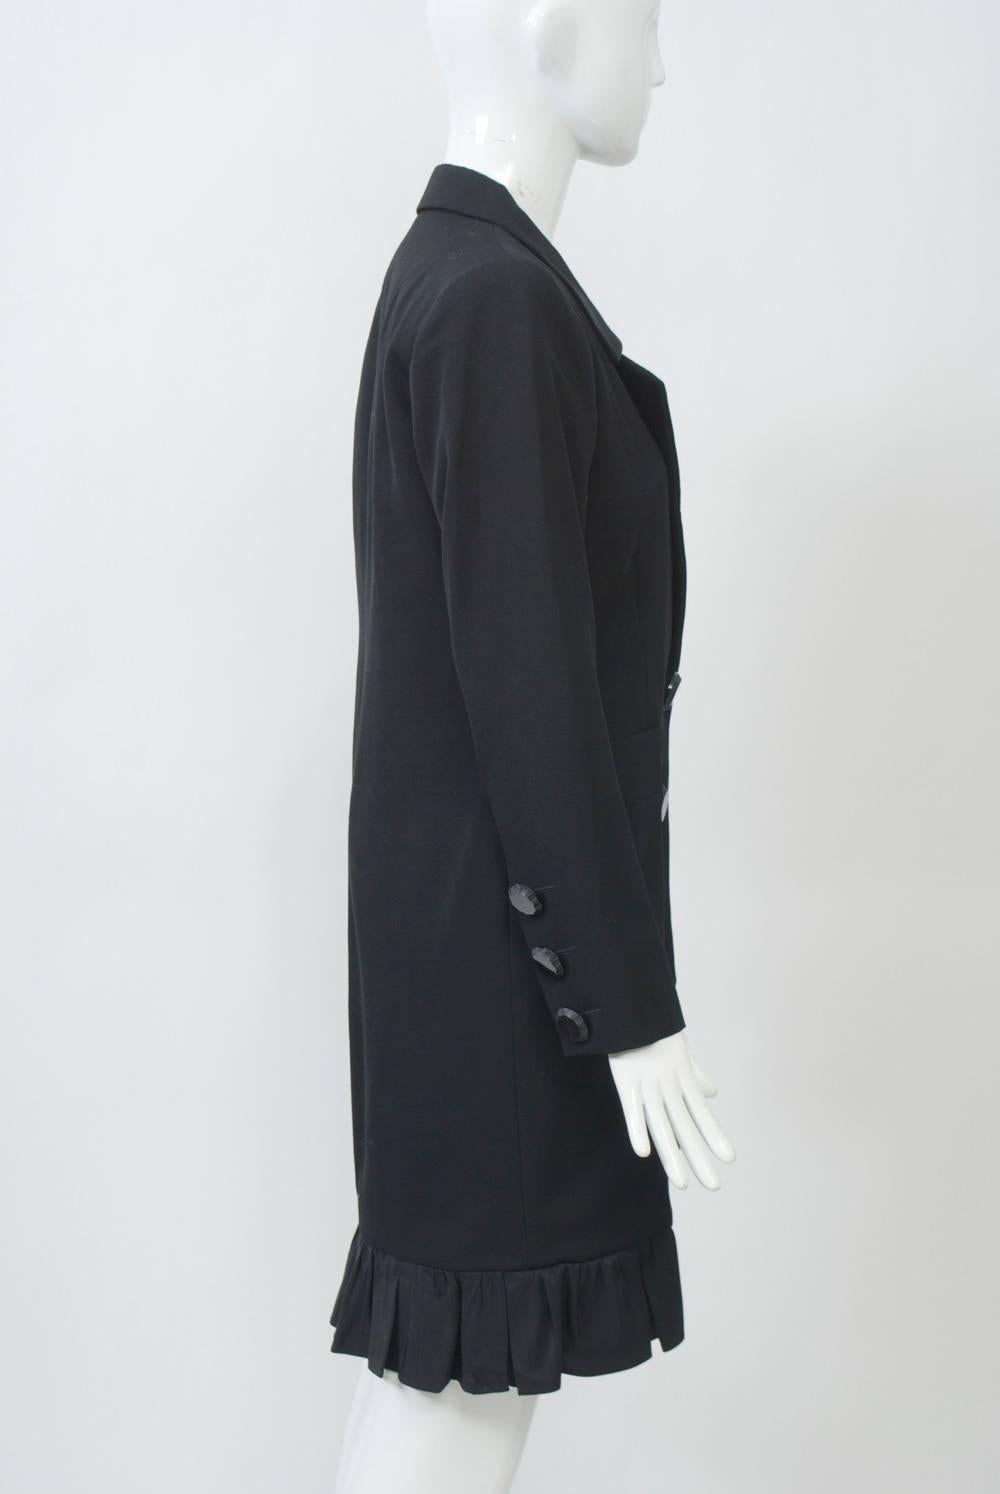 Black tuxedo-style coat dress with satin lapels and large jet buttons down front and at wrist. Satin ruffle at knee-length hem curves up at front. Shaped body with horizontal pockets.  Square shoulders with pads. Lined.